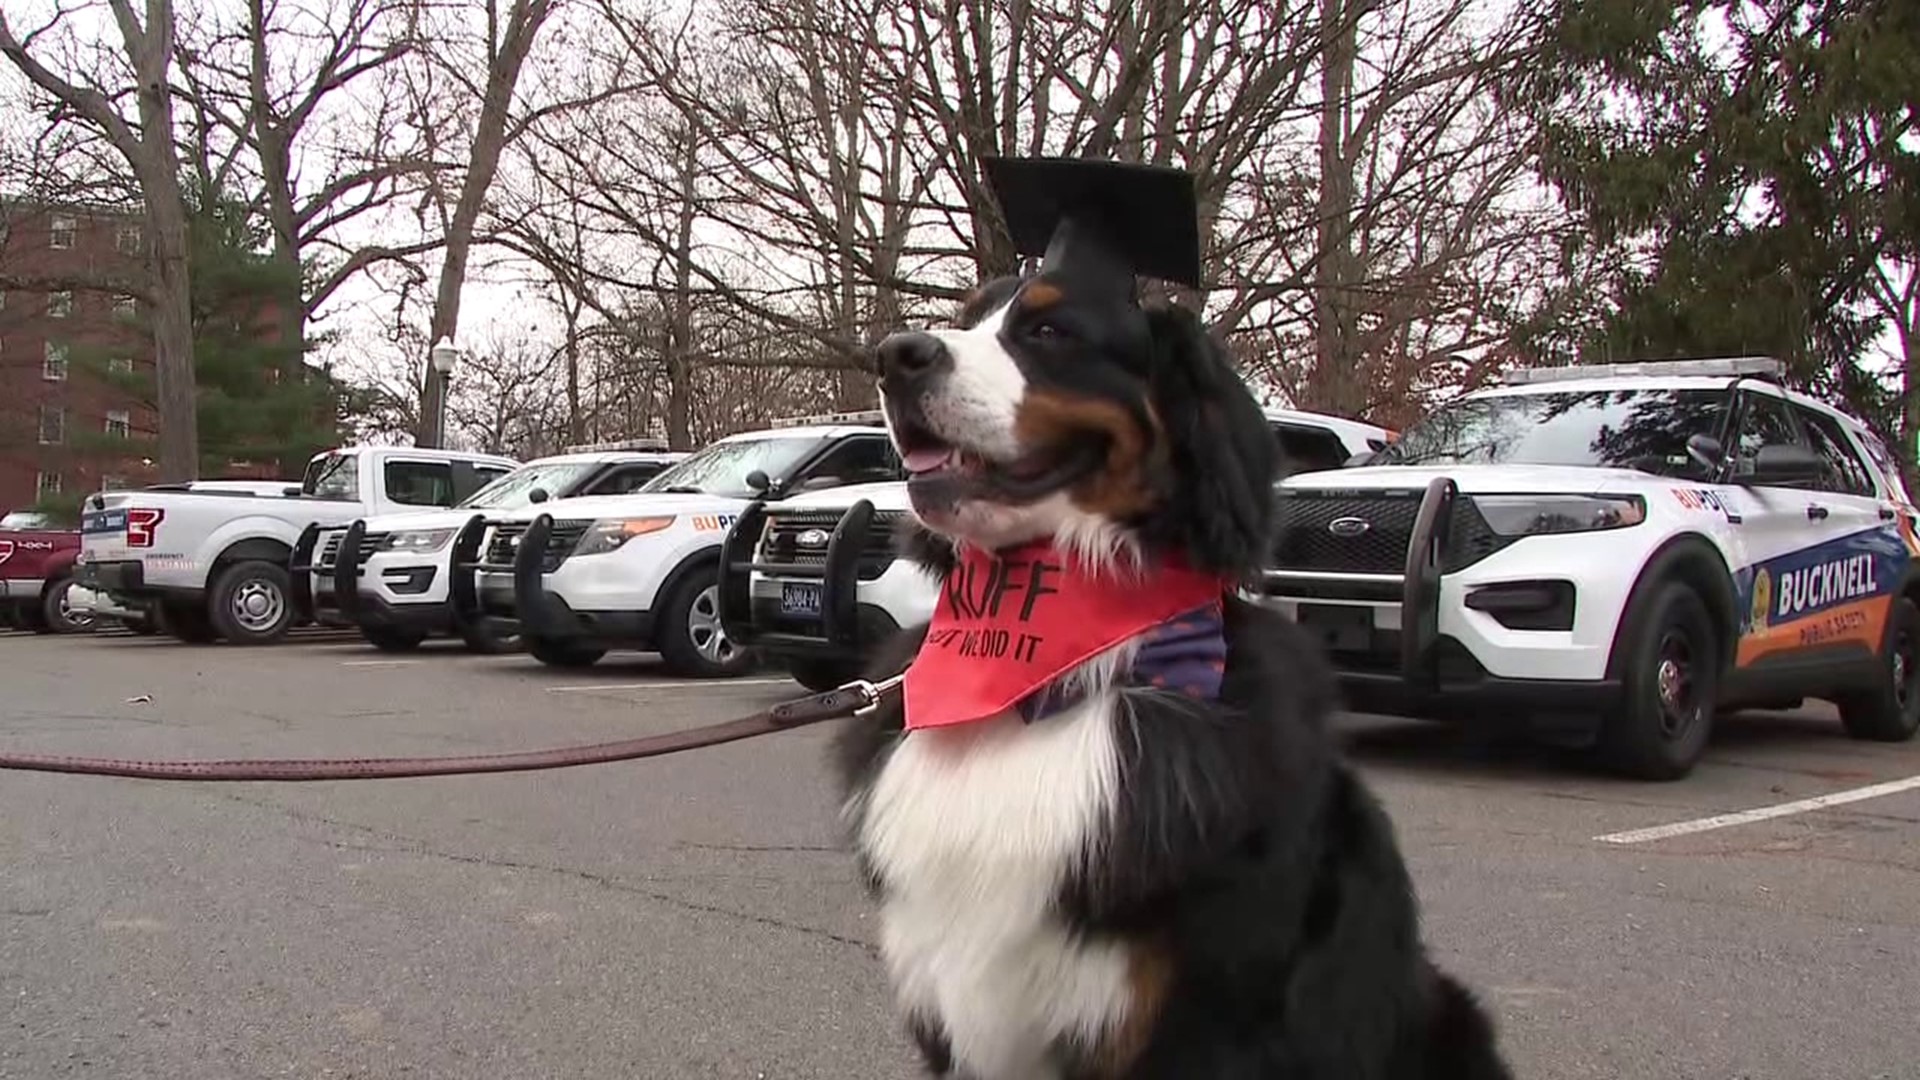 There's a new officer with Bucknell University's Public Safety Department, and Deputy Diggs has four legs.